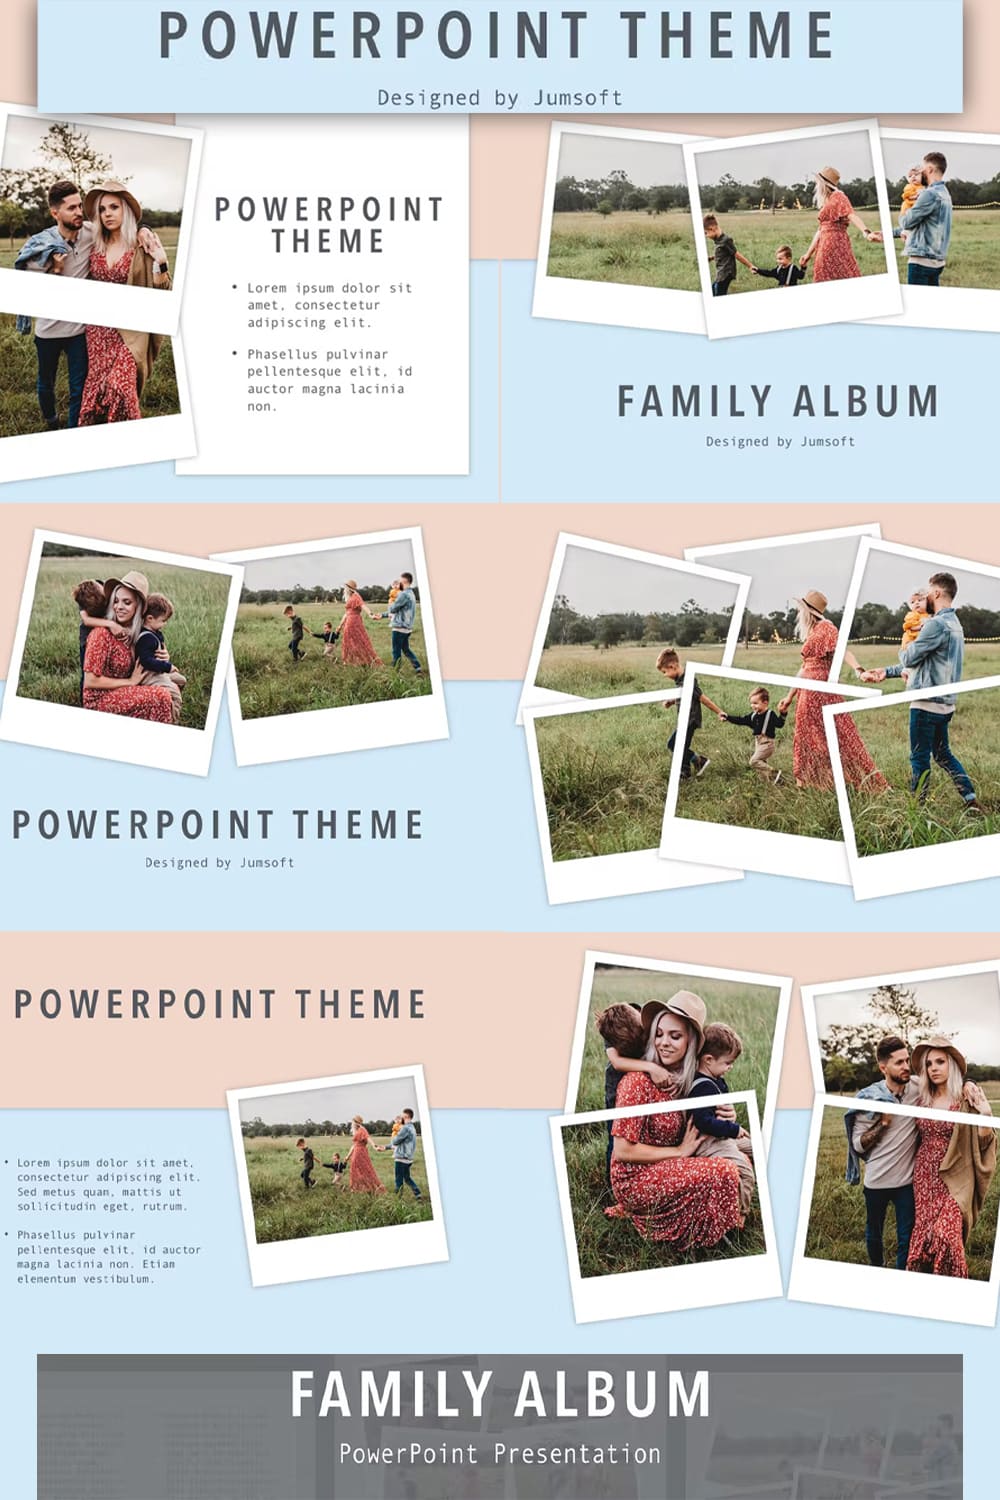 Family album powerpoint template - pinterest image preview.